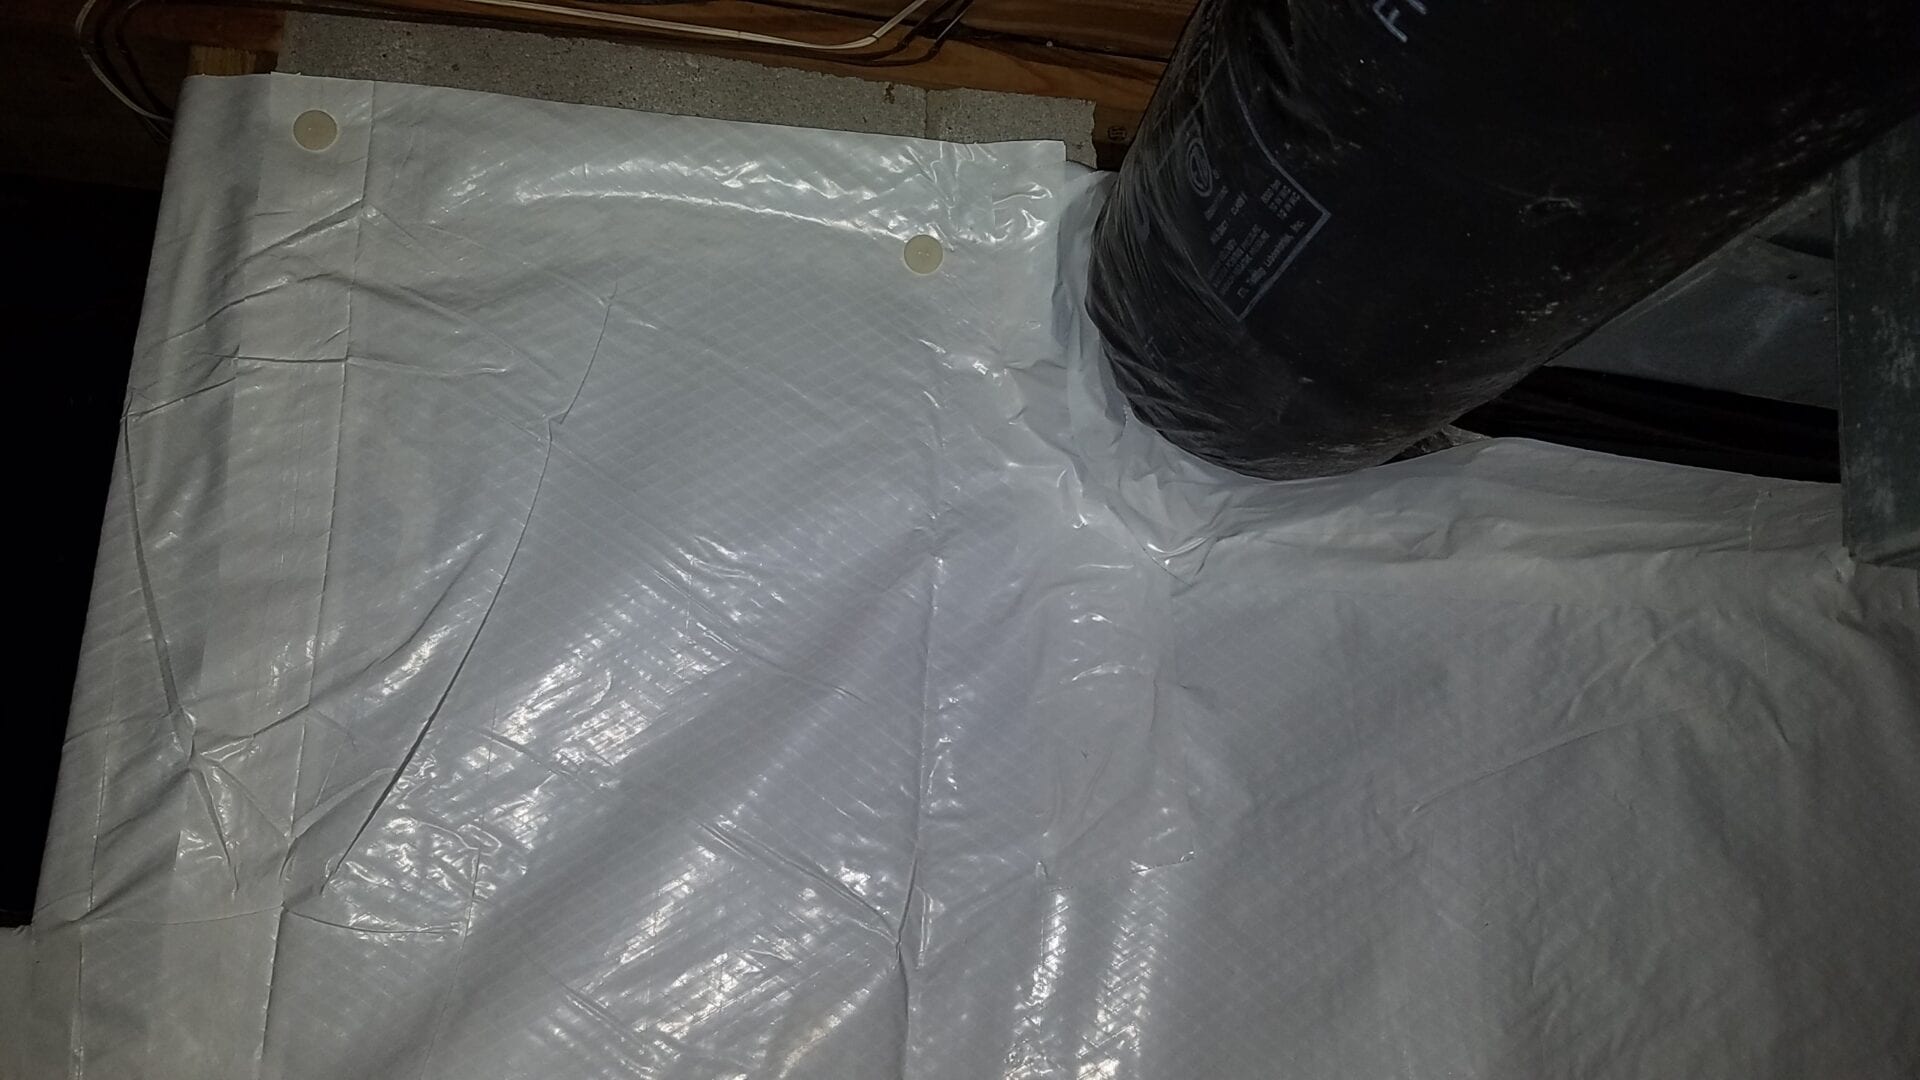 Mold removal being performed under the floor